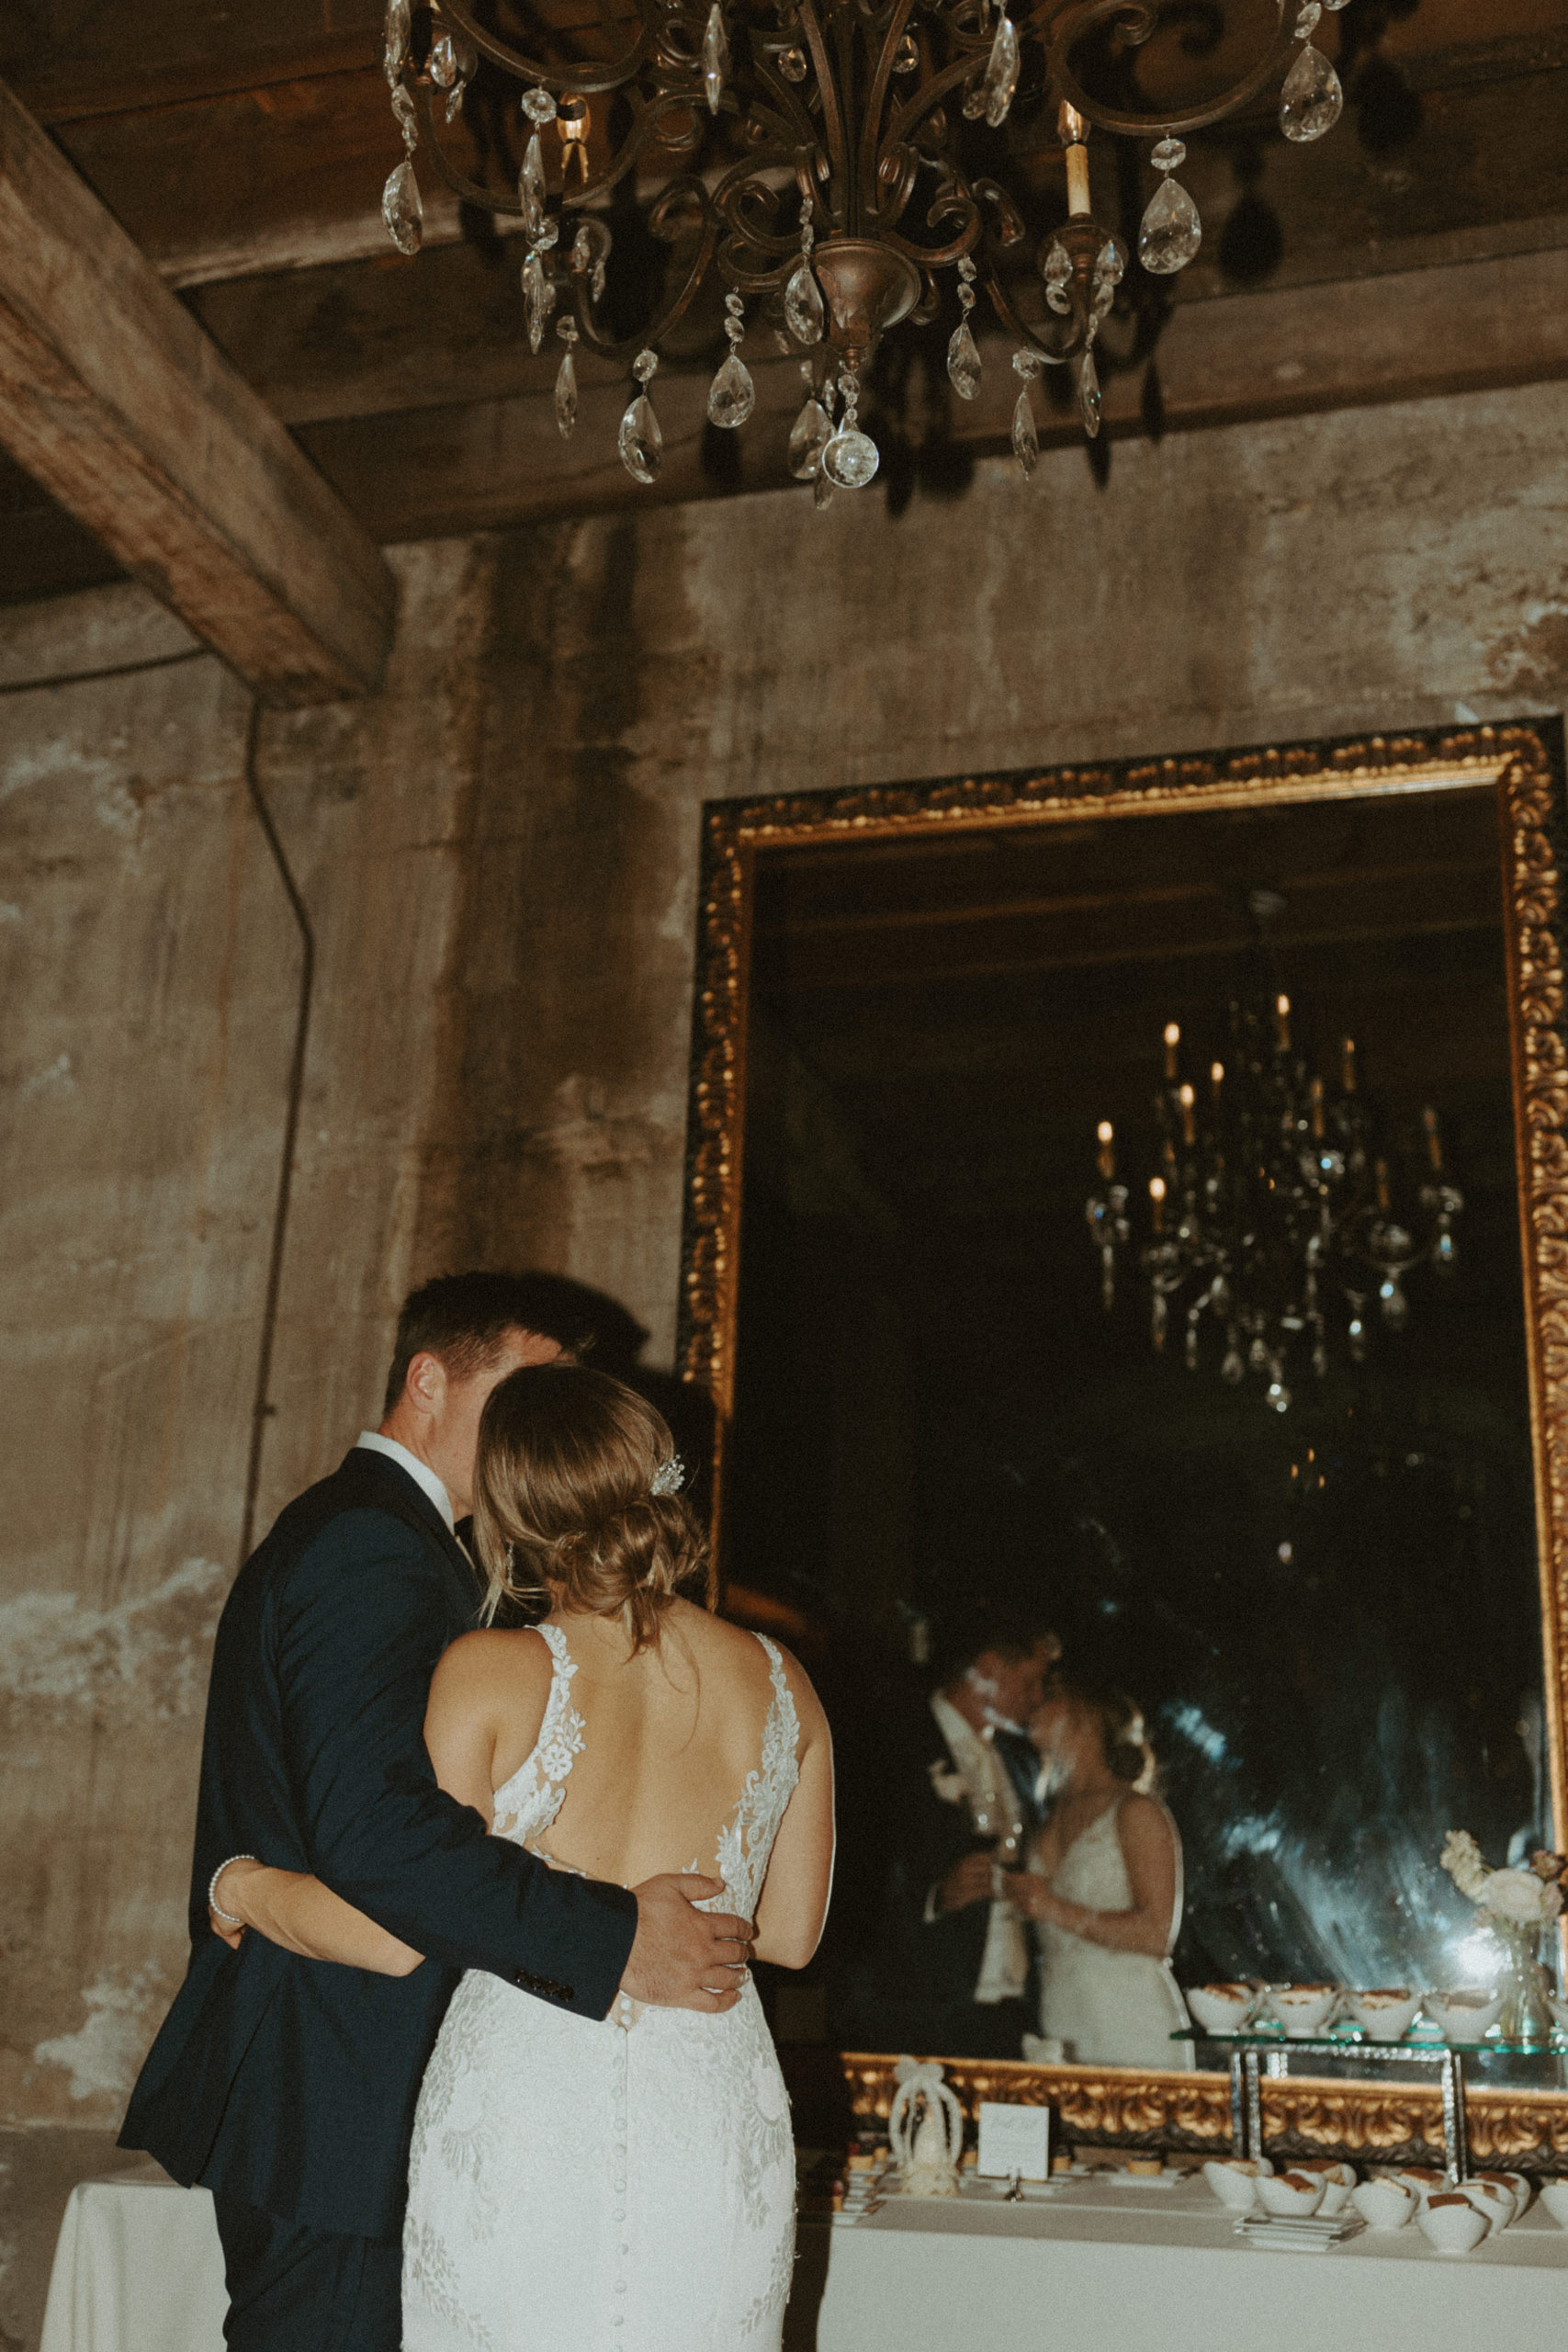 the couple kissing by the mirror during the reception at the venue in California